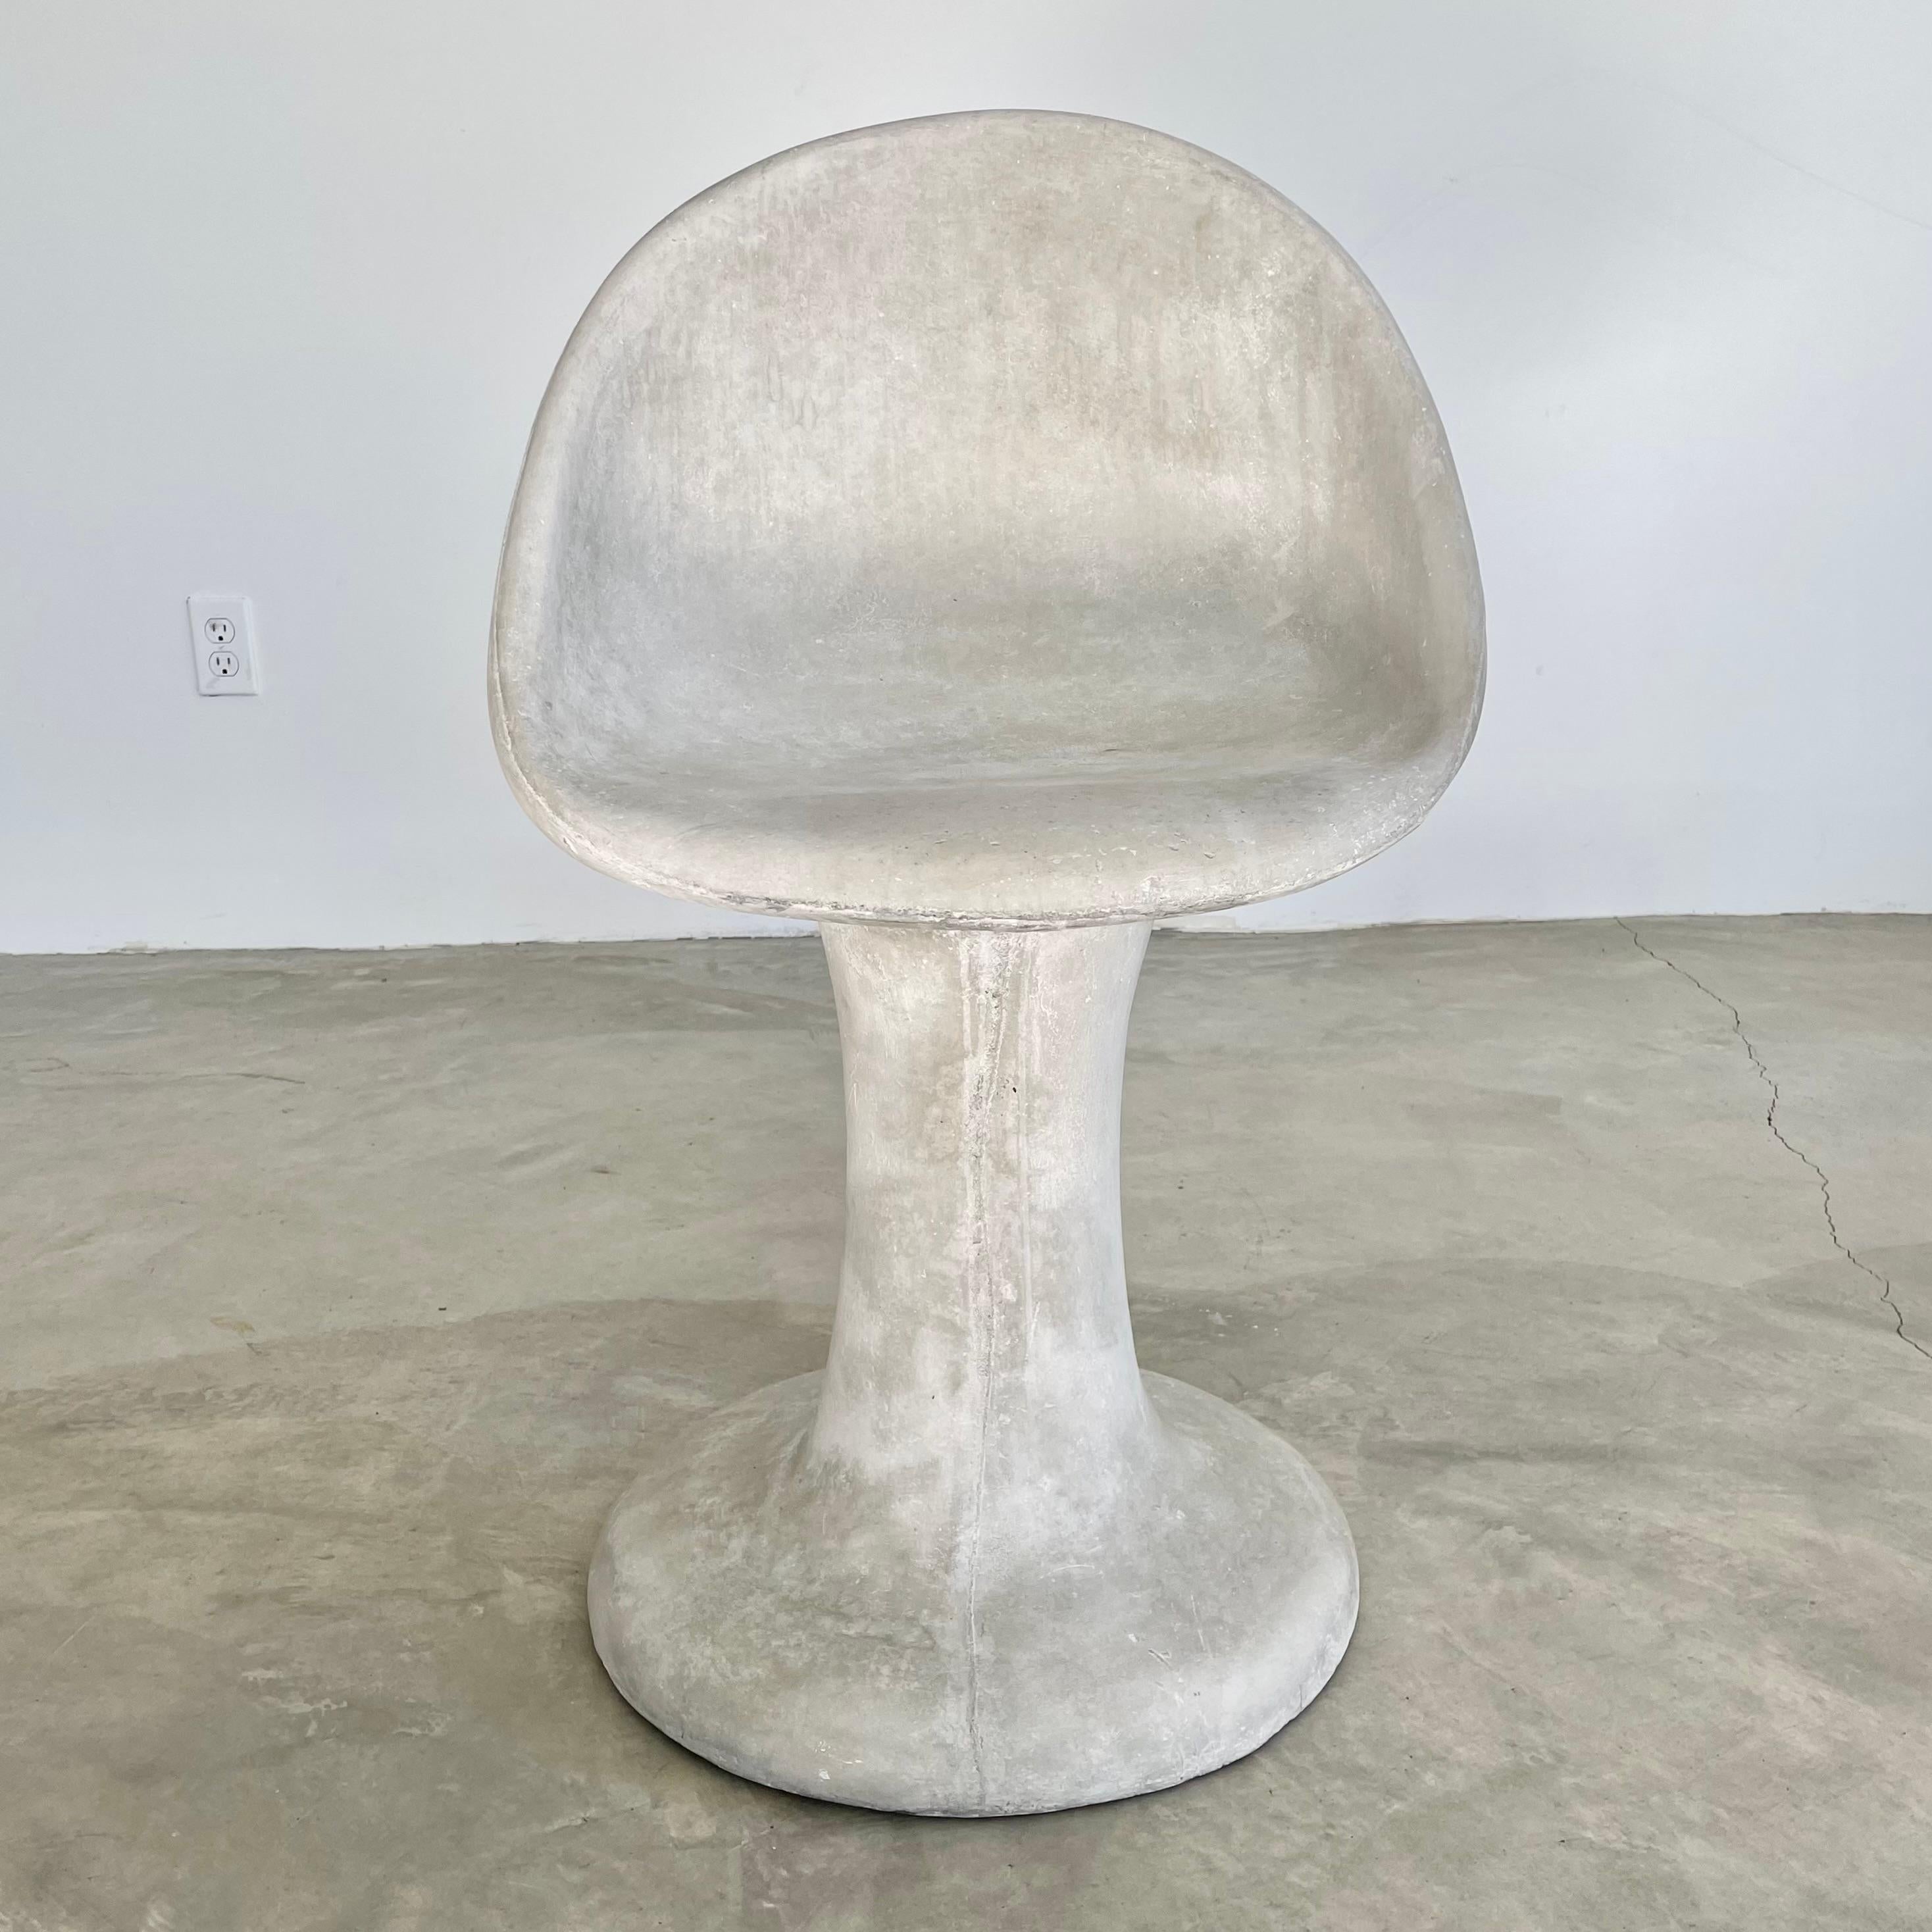 Minimal concrete chairs with a tulip style base and a scoop seat. Handmade by Merit in Los Angeles. These chairs feature a lower seat back and a heavy base which gives them great balance and more stability. Beautiful design that is extremely heavy